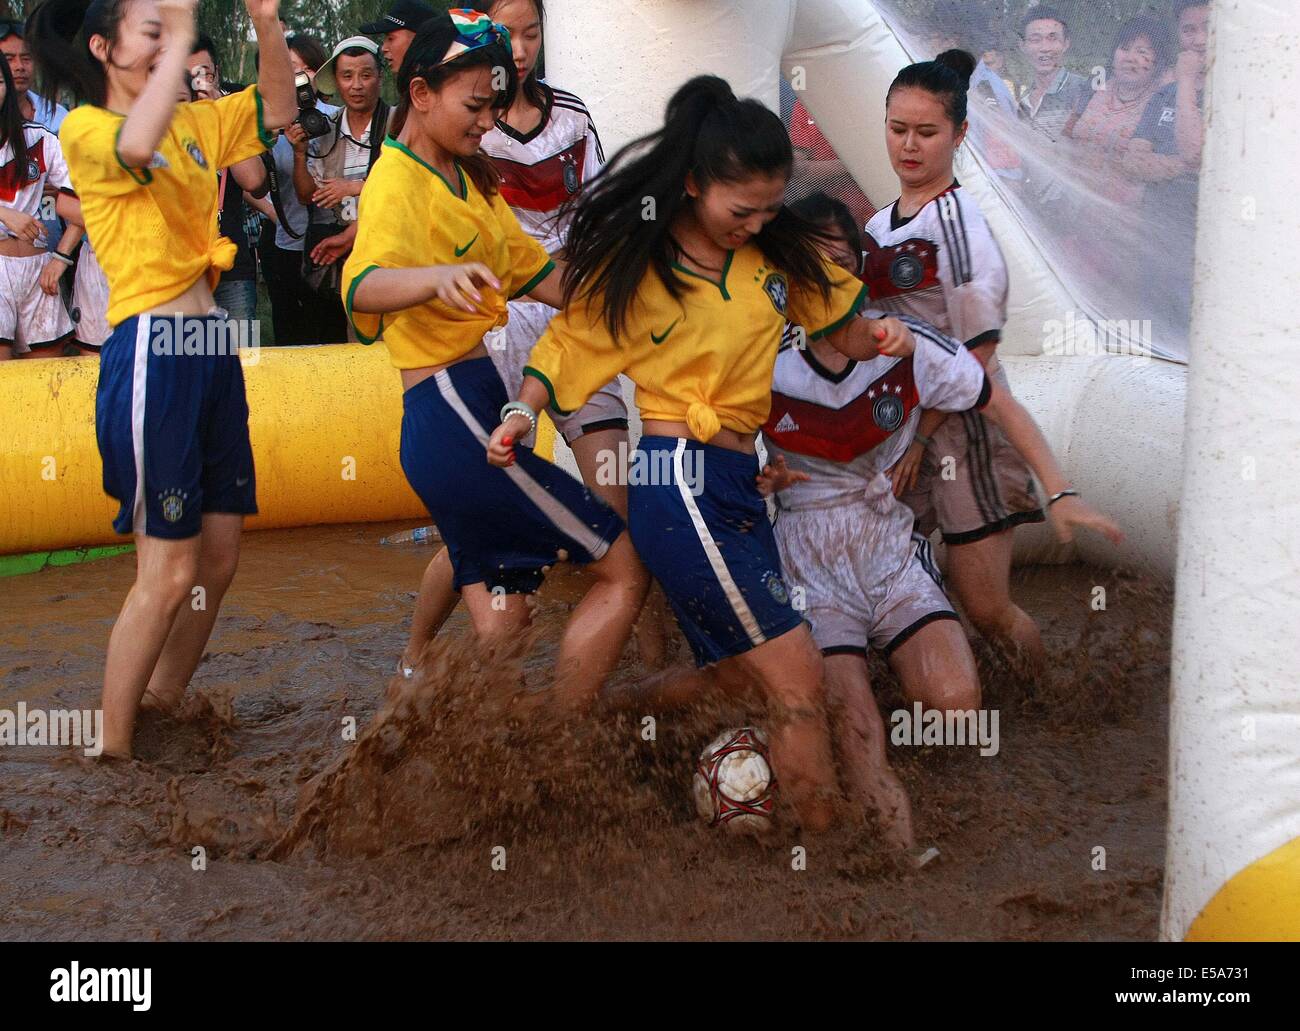 Two groups of girls wearing Germany national football team jersey and Brazil national team jersey play mud football on July 13, 2014 in Xi'an, Shaanxi province of China.Mud football was originated from Finland, and it has become more and more popular in China. Stock Photo